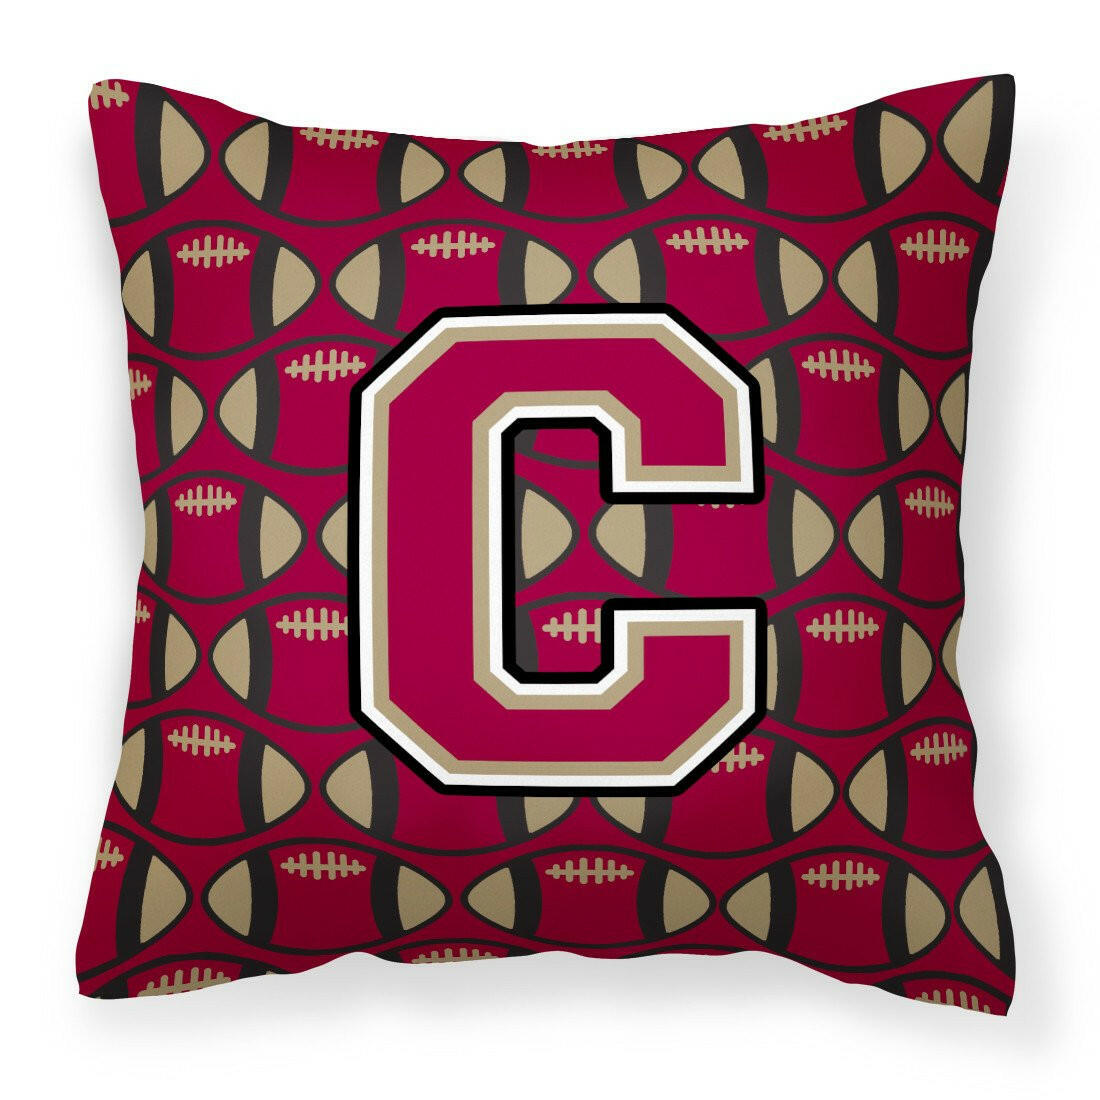 Letter C Football Garnet and Gold Fabric Decorative Pillow CJ1078-CPW1414 by Caroline's Treasures